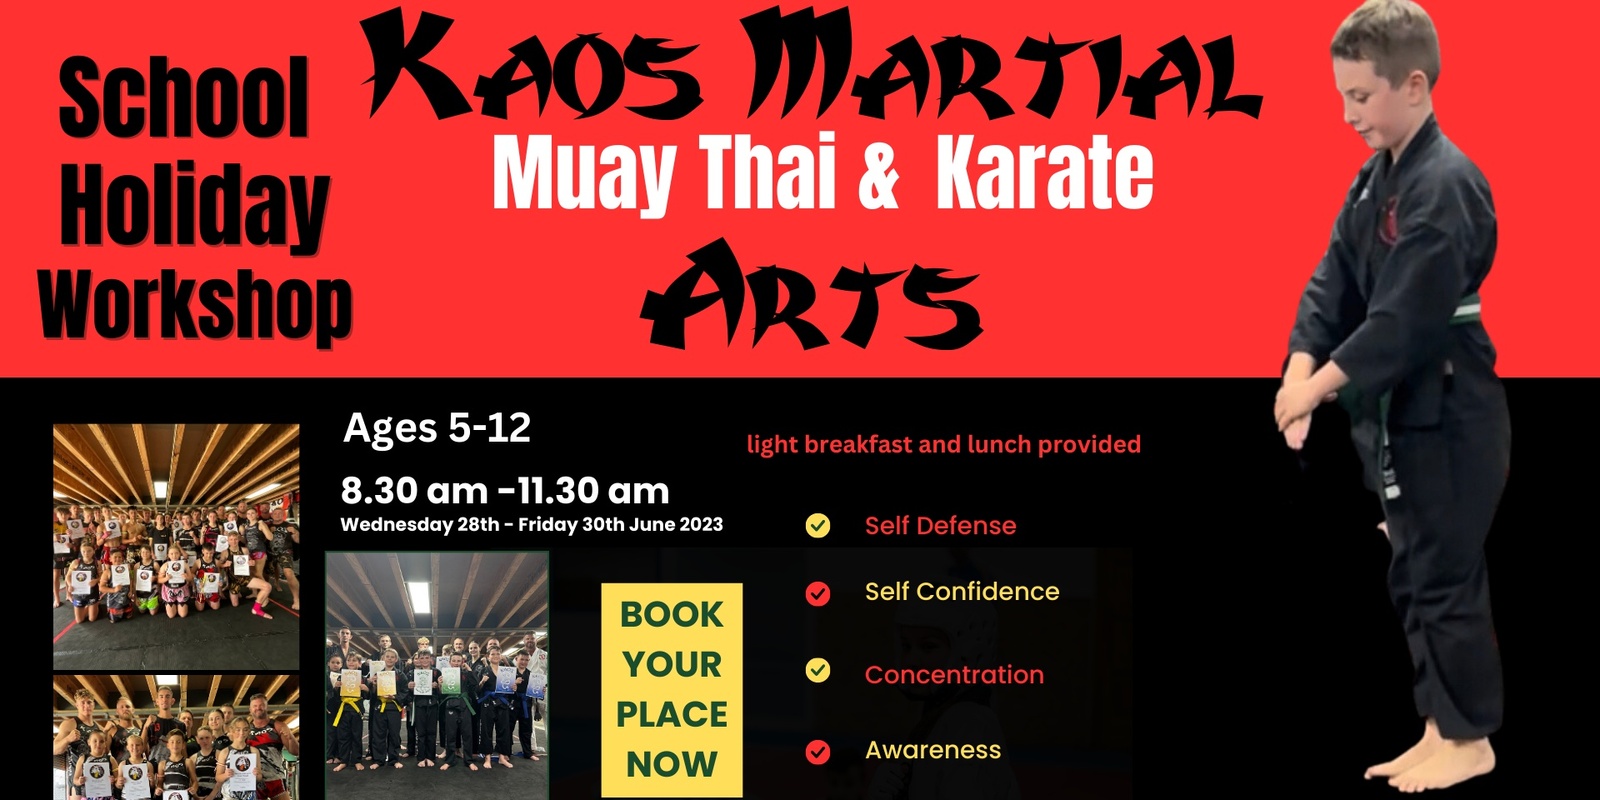 Banner image for Kaos Martial Arts School Holiday Workshop